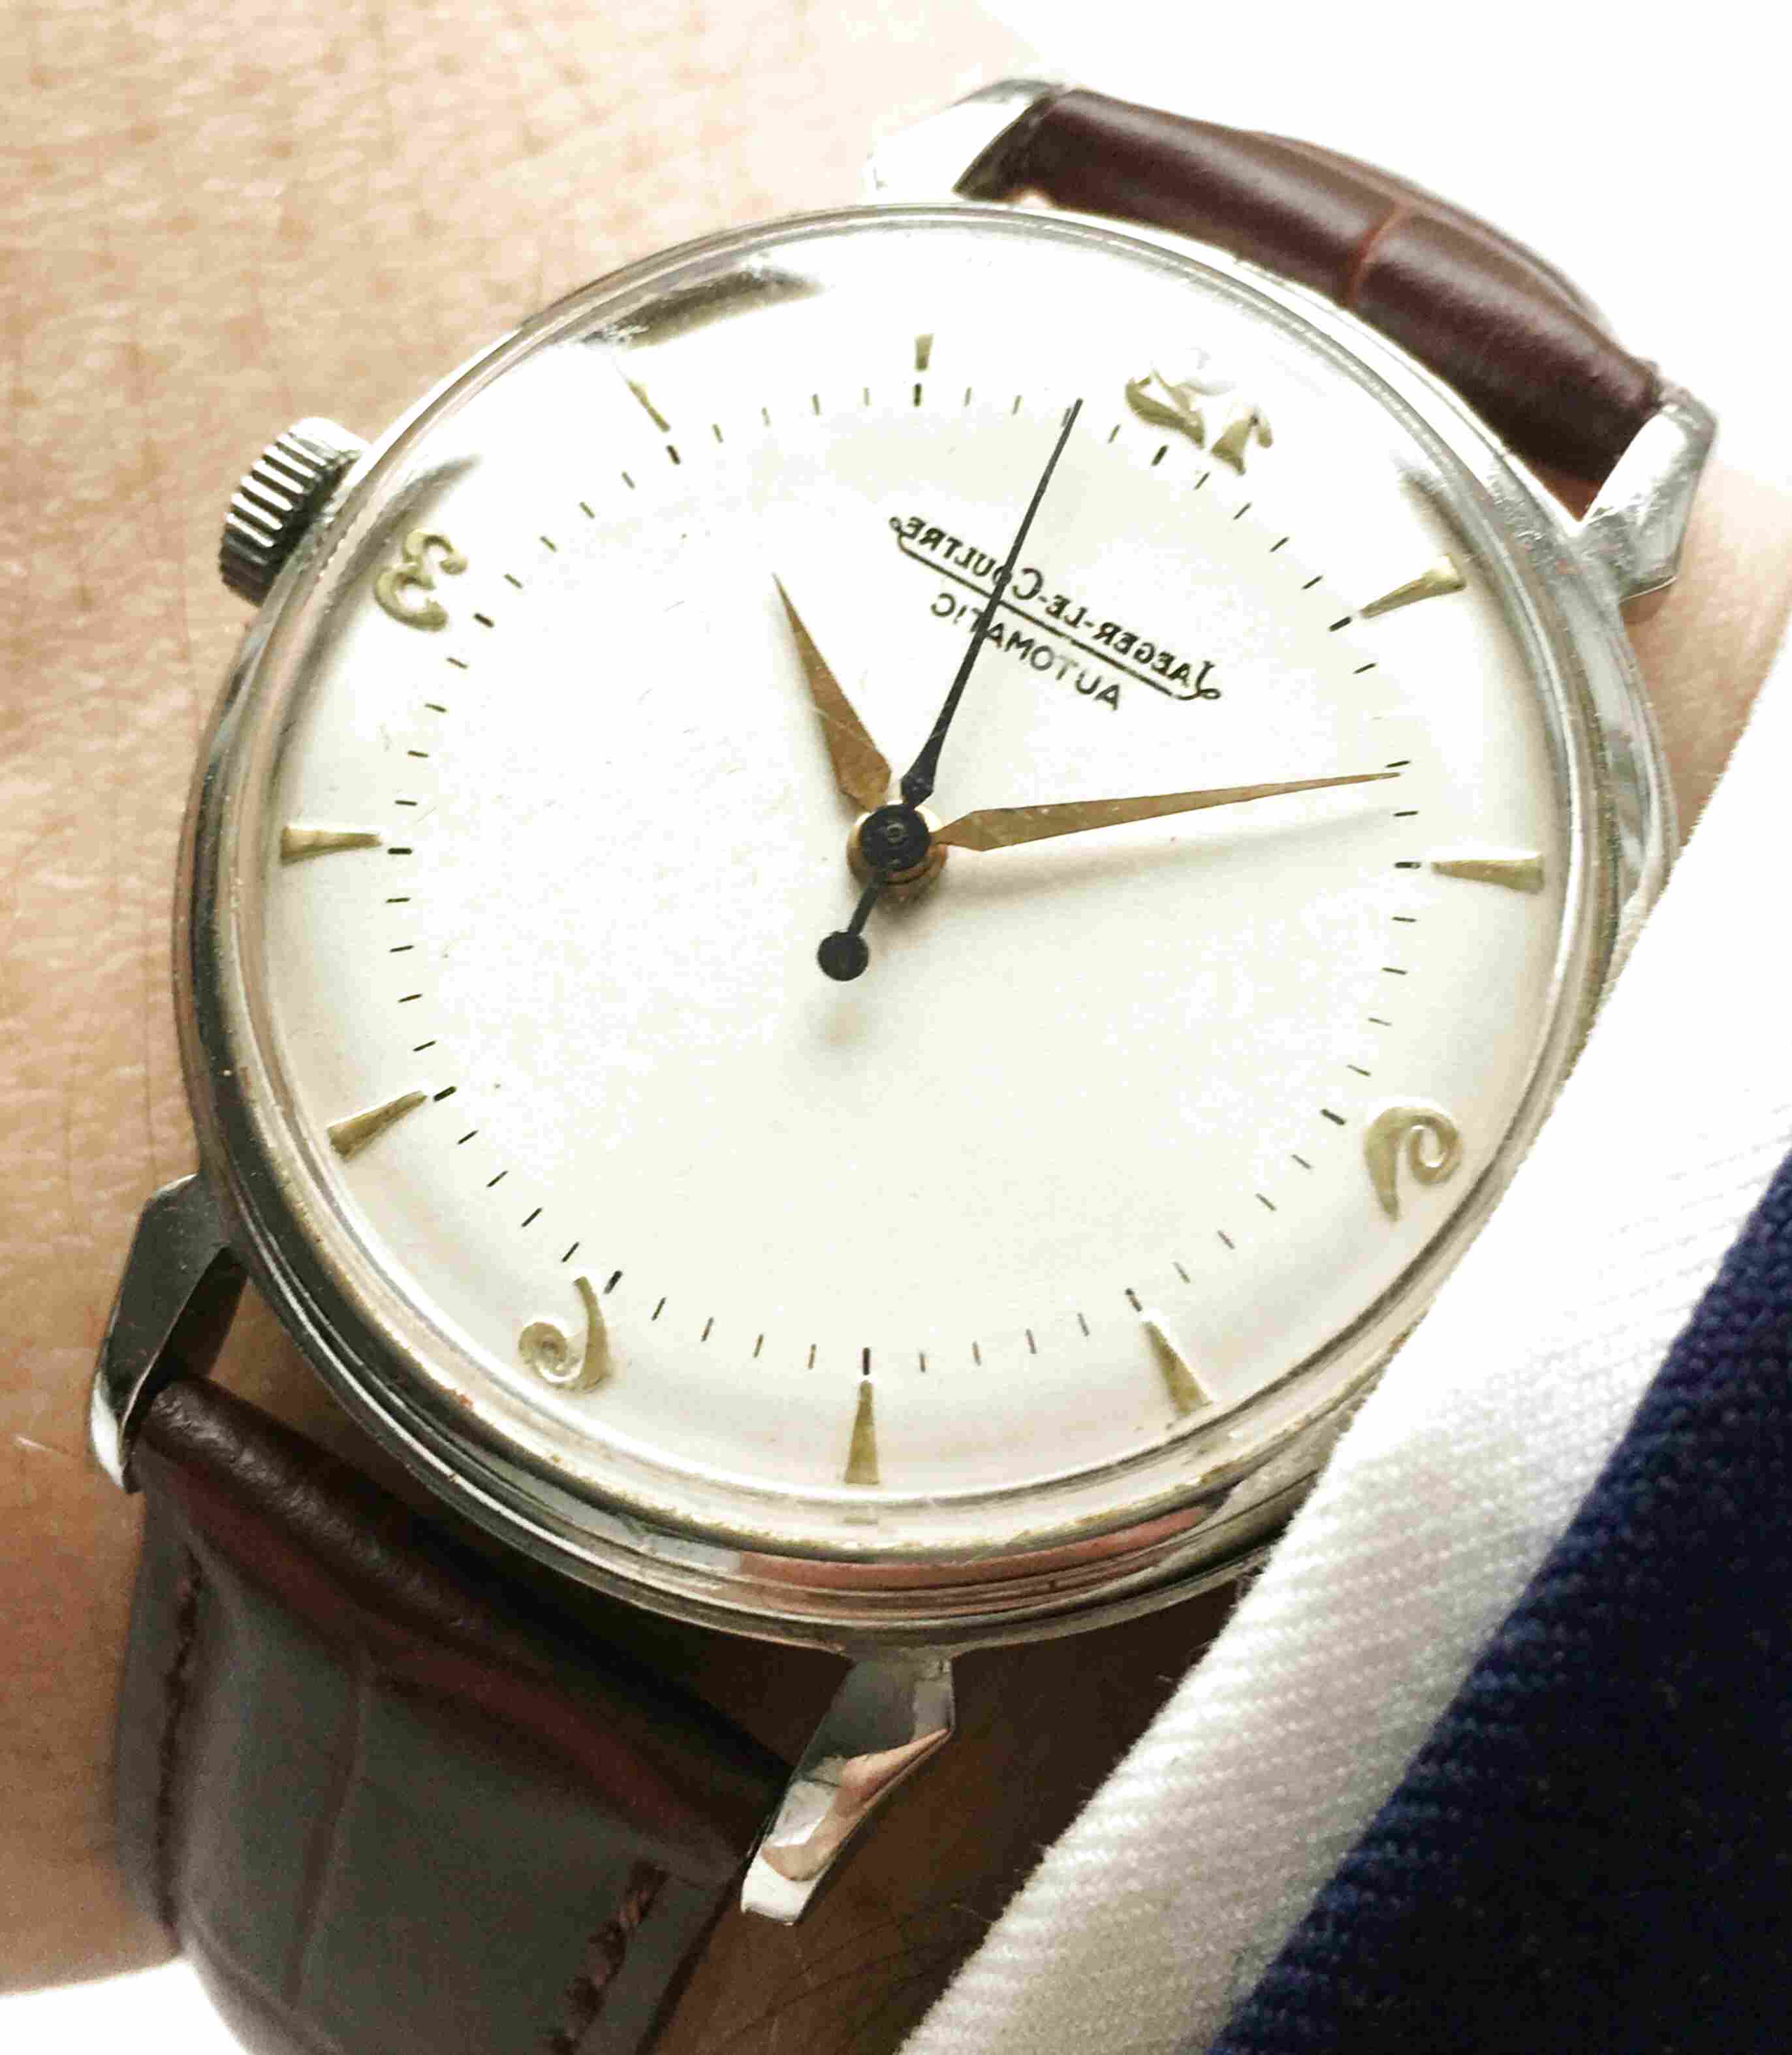 Vintage Jaeger Lecoultre Watch for sale in UK